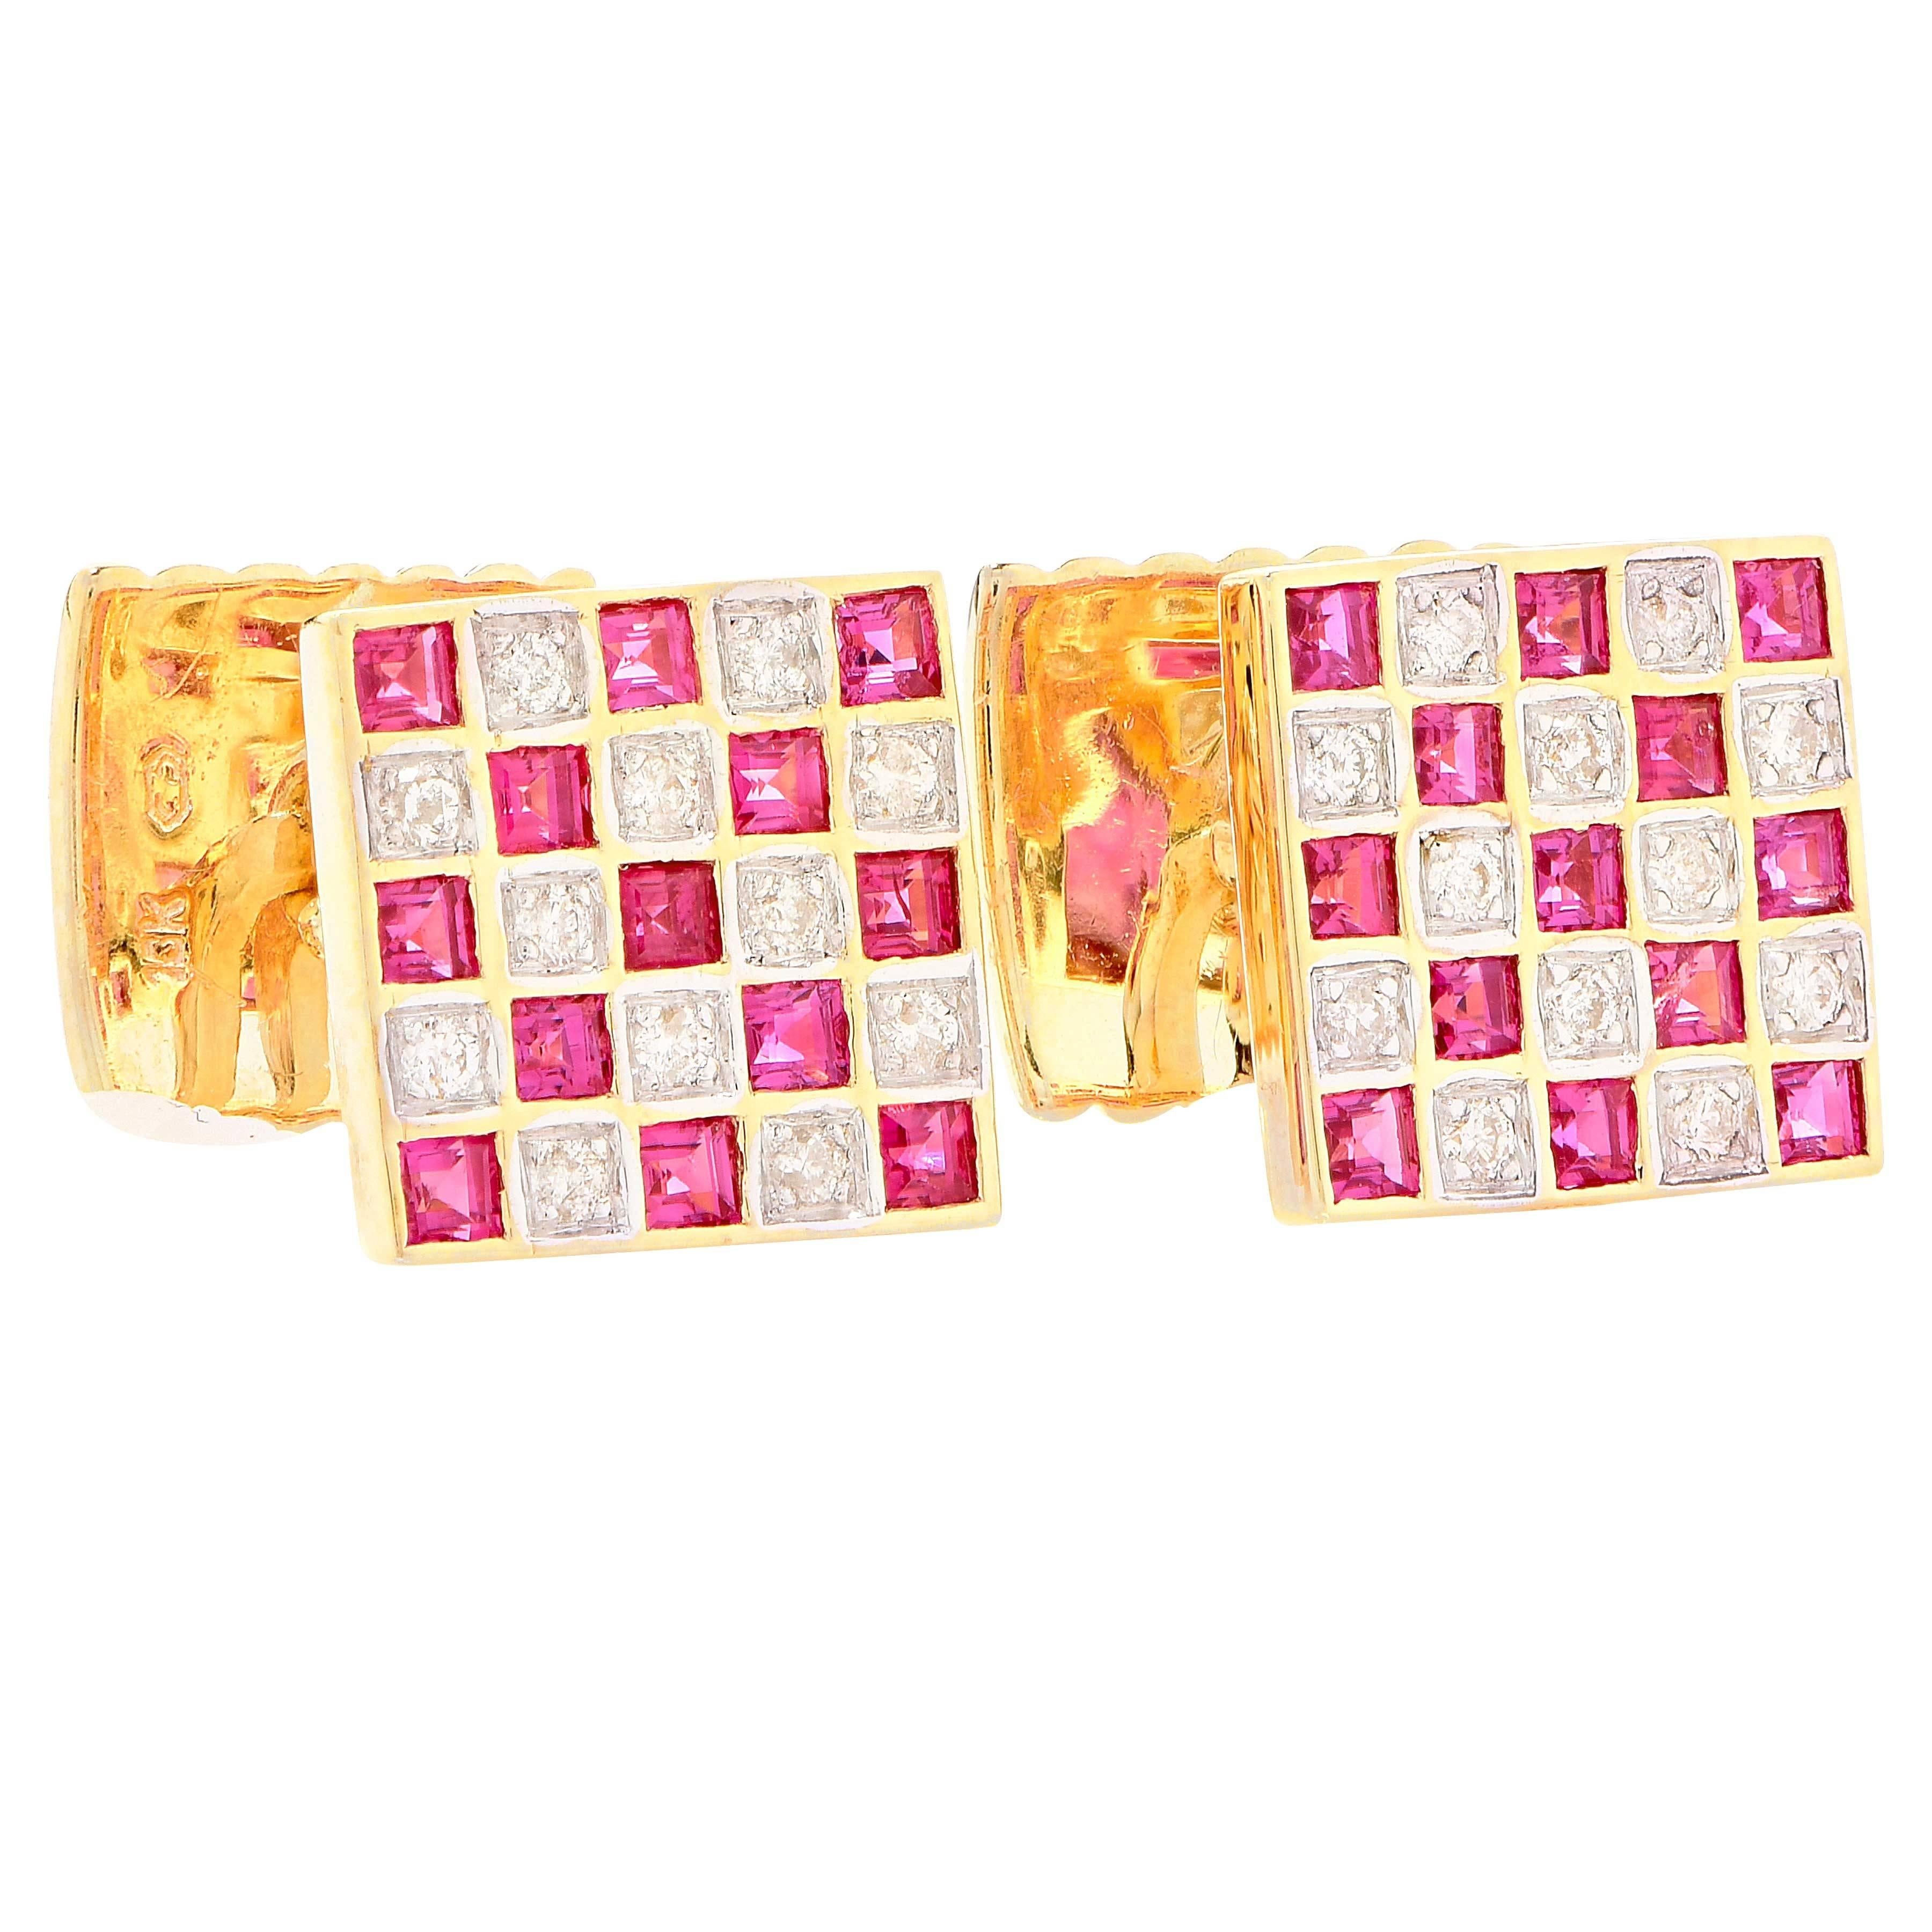 Ruby and diamond cufflinks, with approximately 2 carats of rubies set in gold.